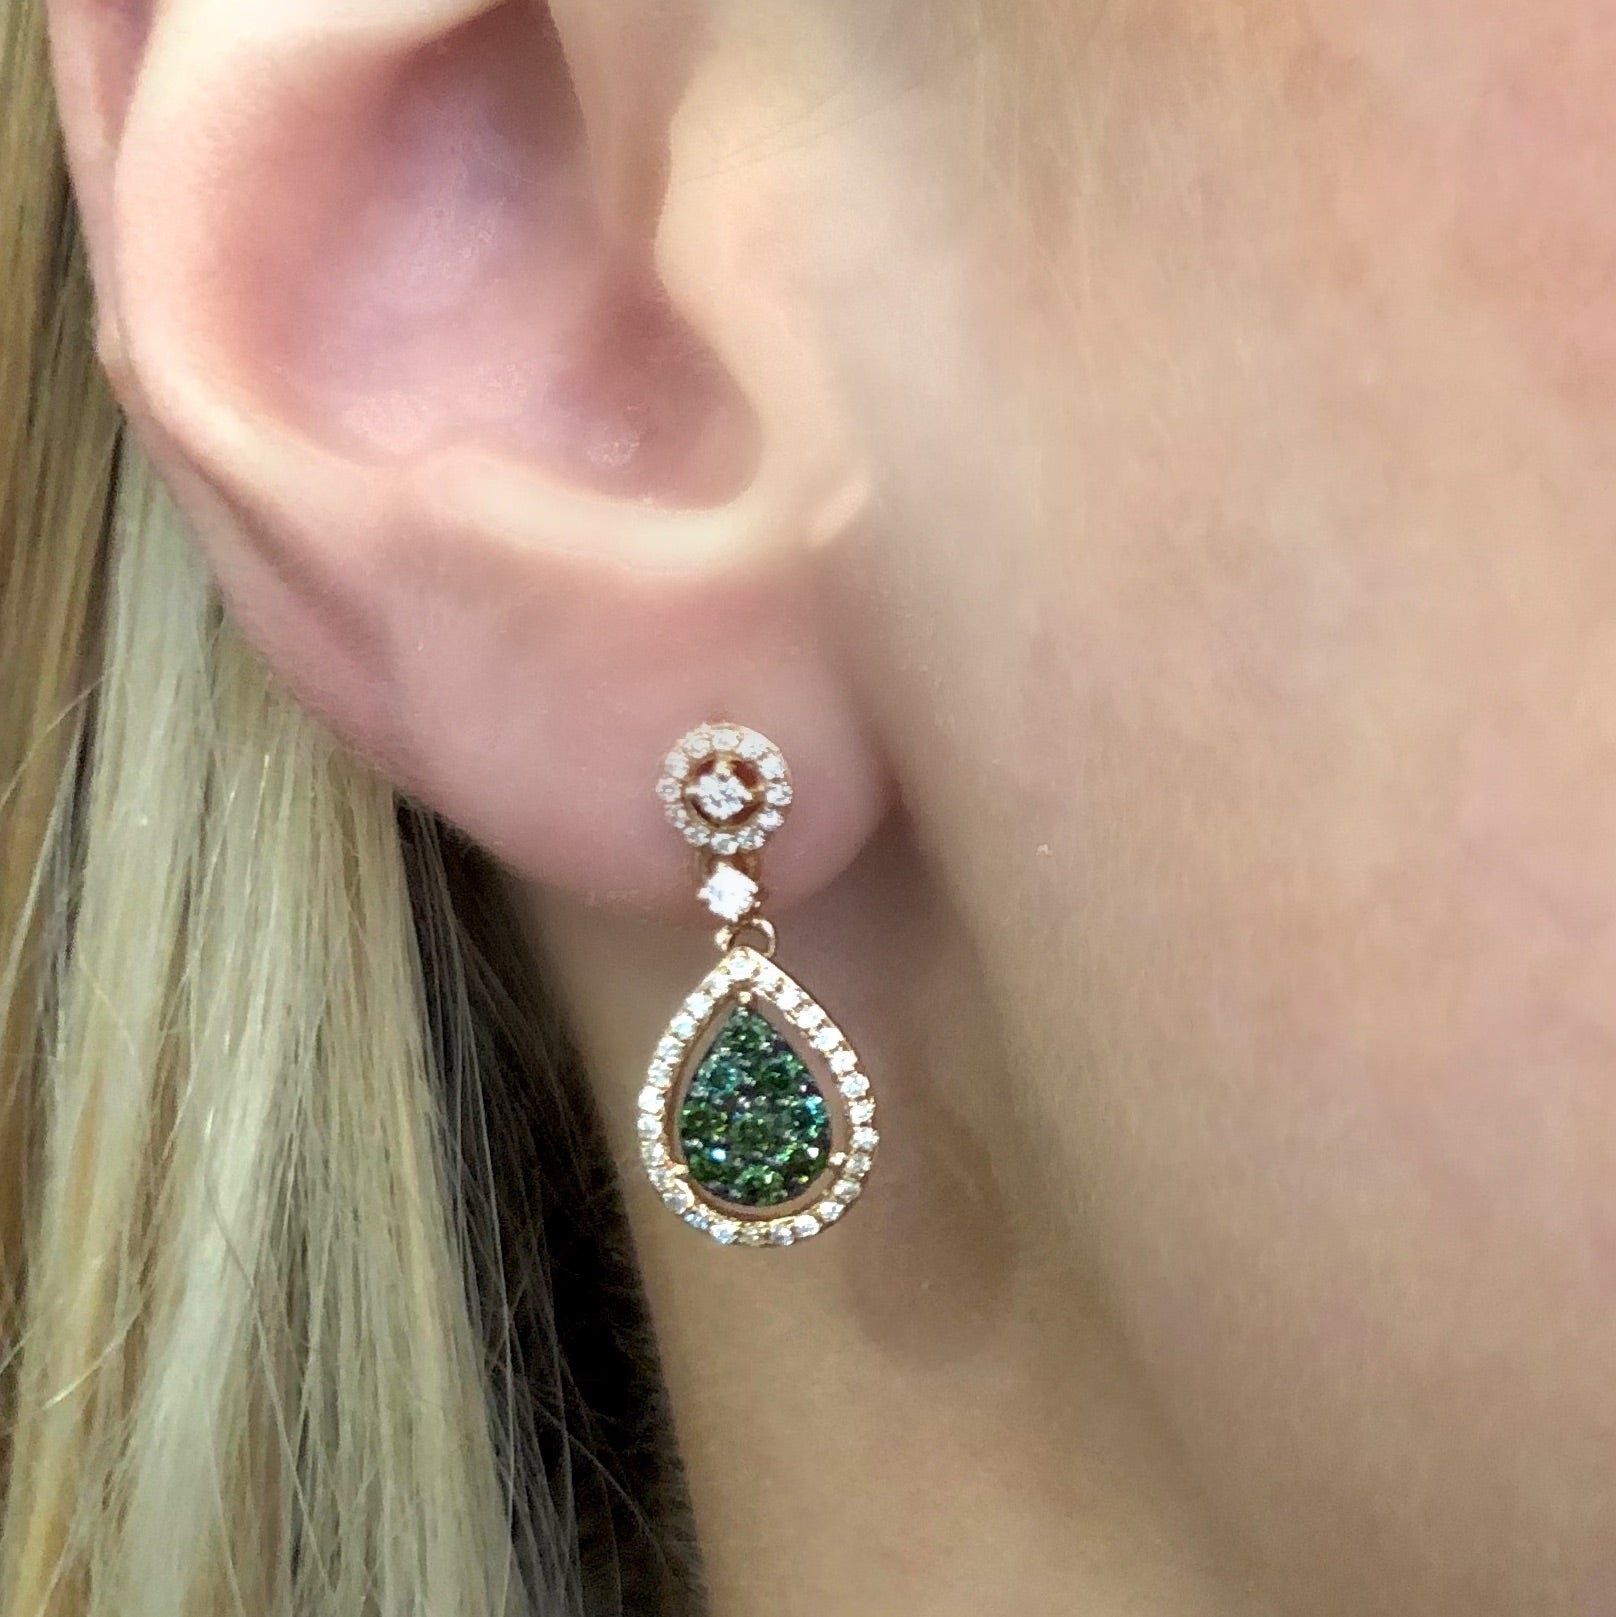 Green and White Diamond Tuscany Earrings - Talisman Collection Fine Jewelers